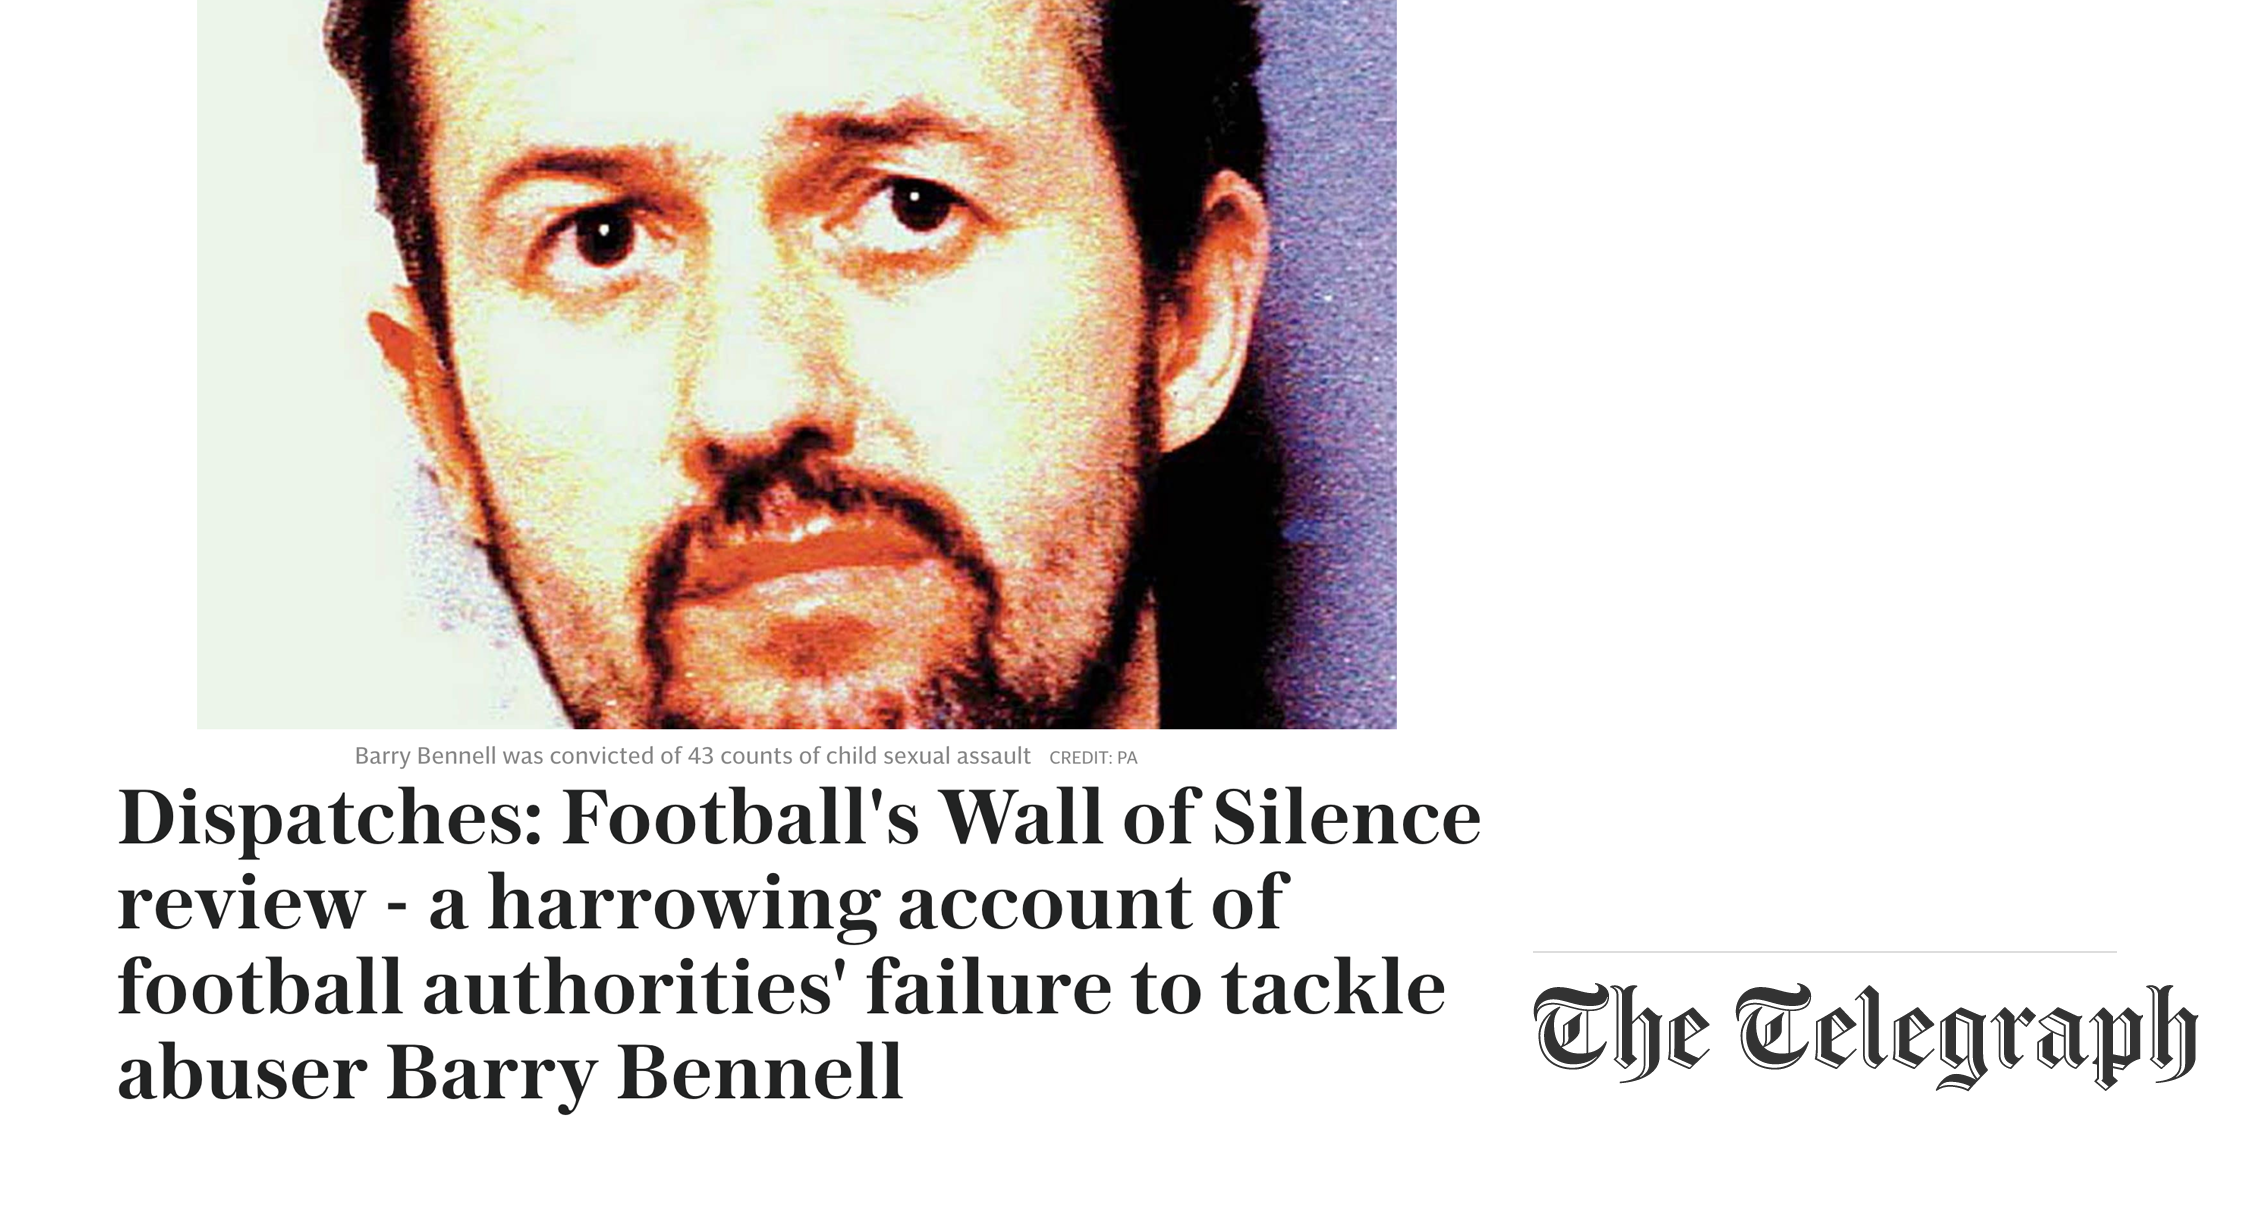 Football’s Wall of Silence review – a harrowing account of football authorities’ failure to tackle abuser Barry Bennell